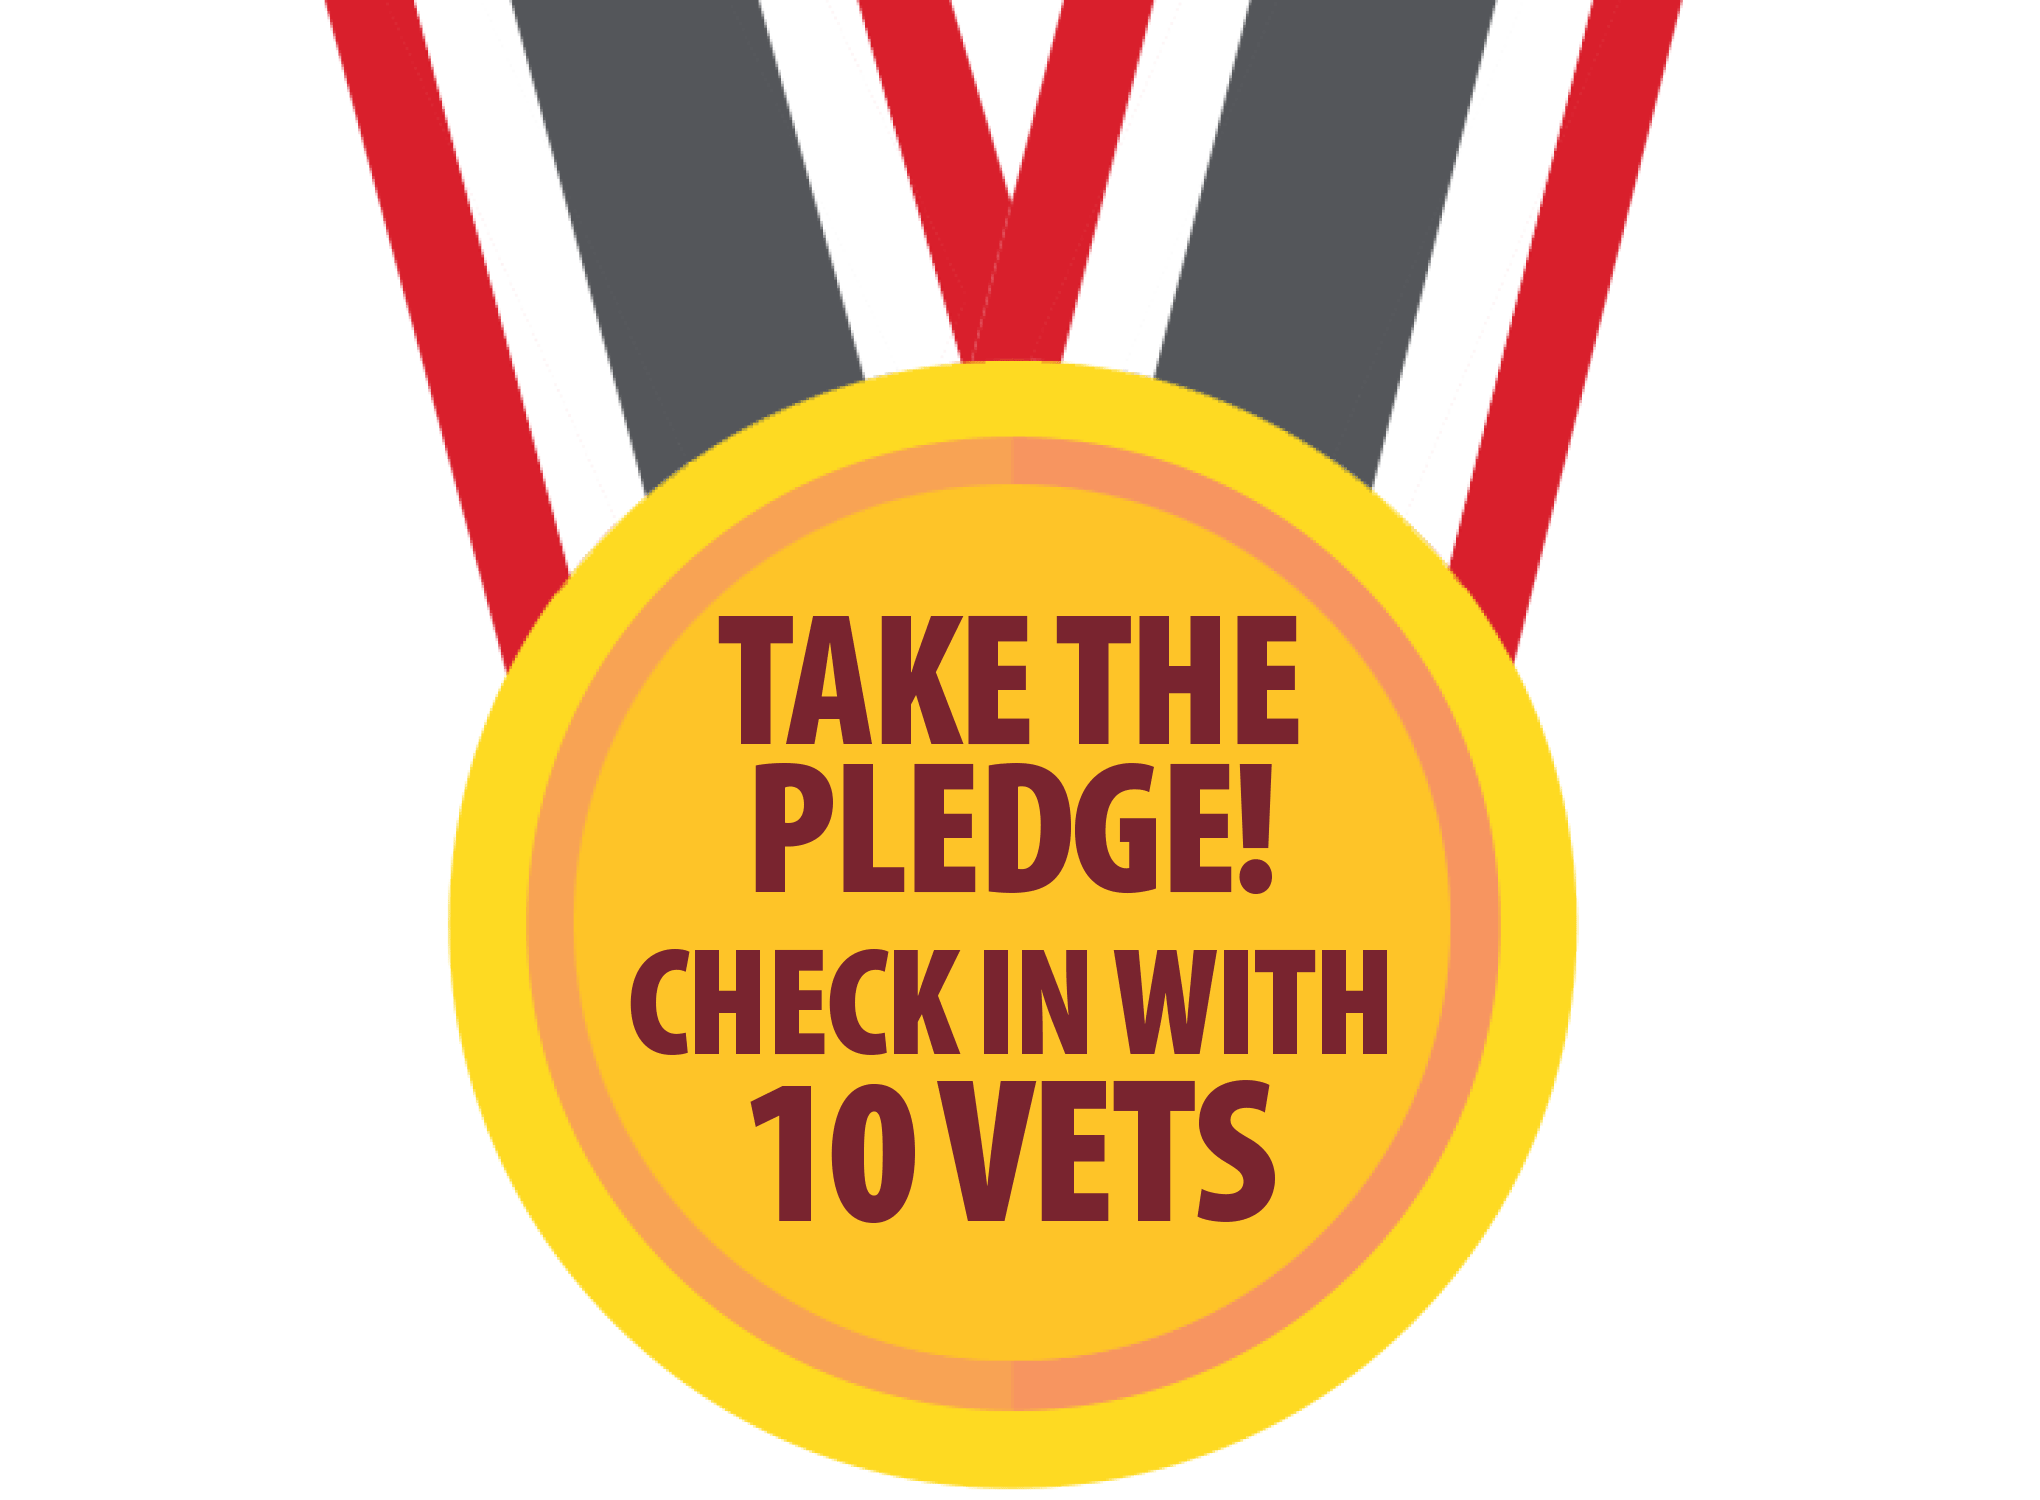 Red, white, and gray ribbon with round disc and text, "Take the pledge! Check in with 10 Vets!"